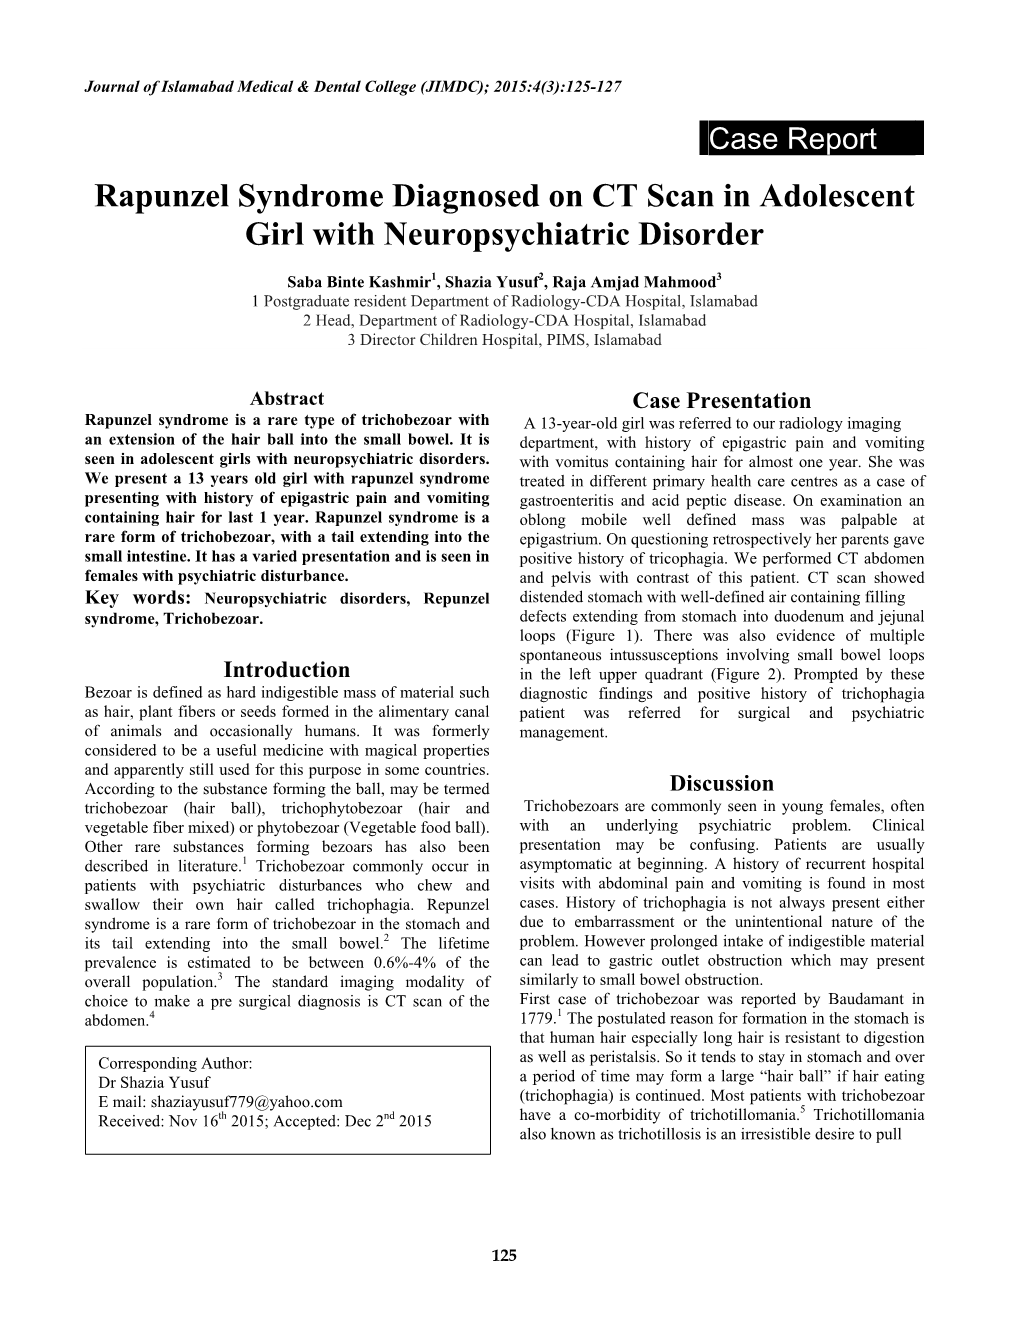 Rapunzel Syndrome Diagnosed on CT Scan in Adolescent Girl with Neuropsychiatric Disorder